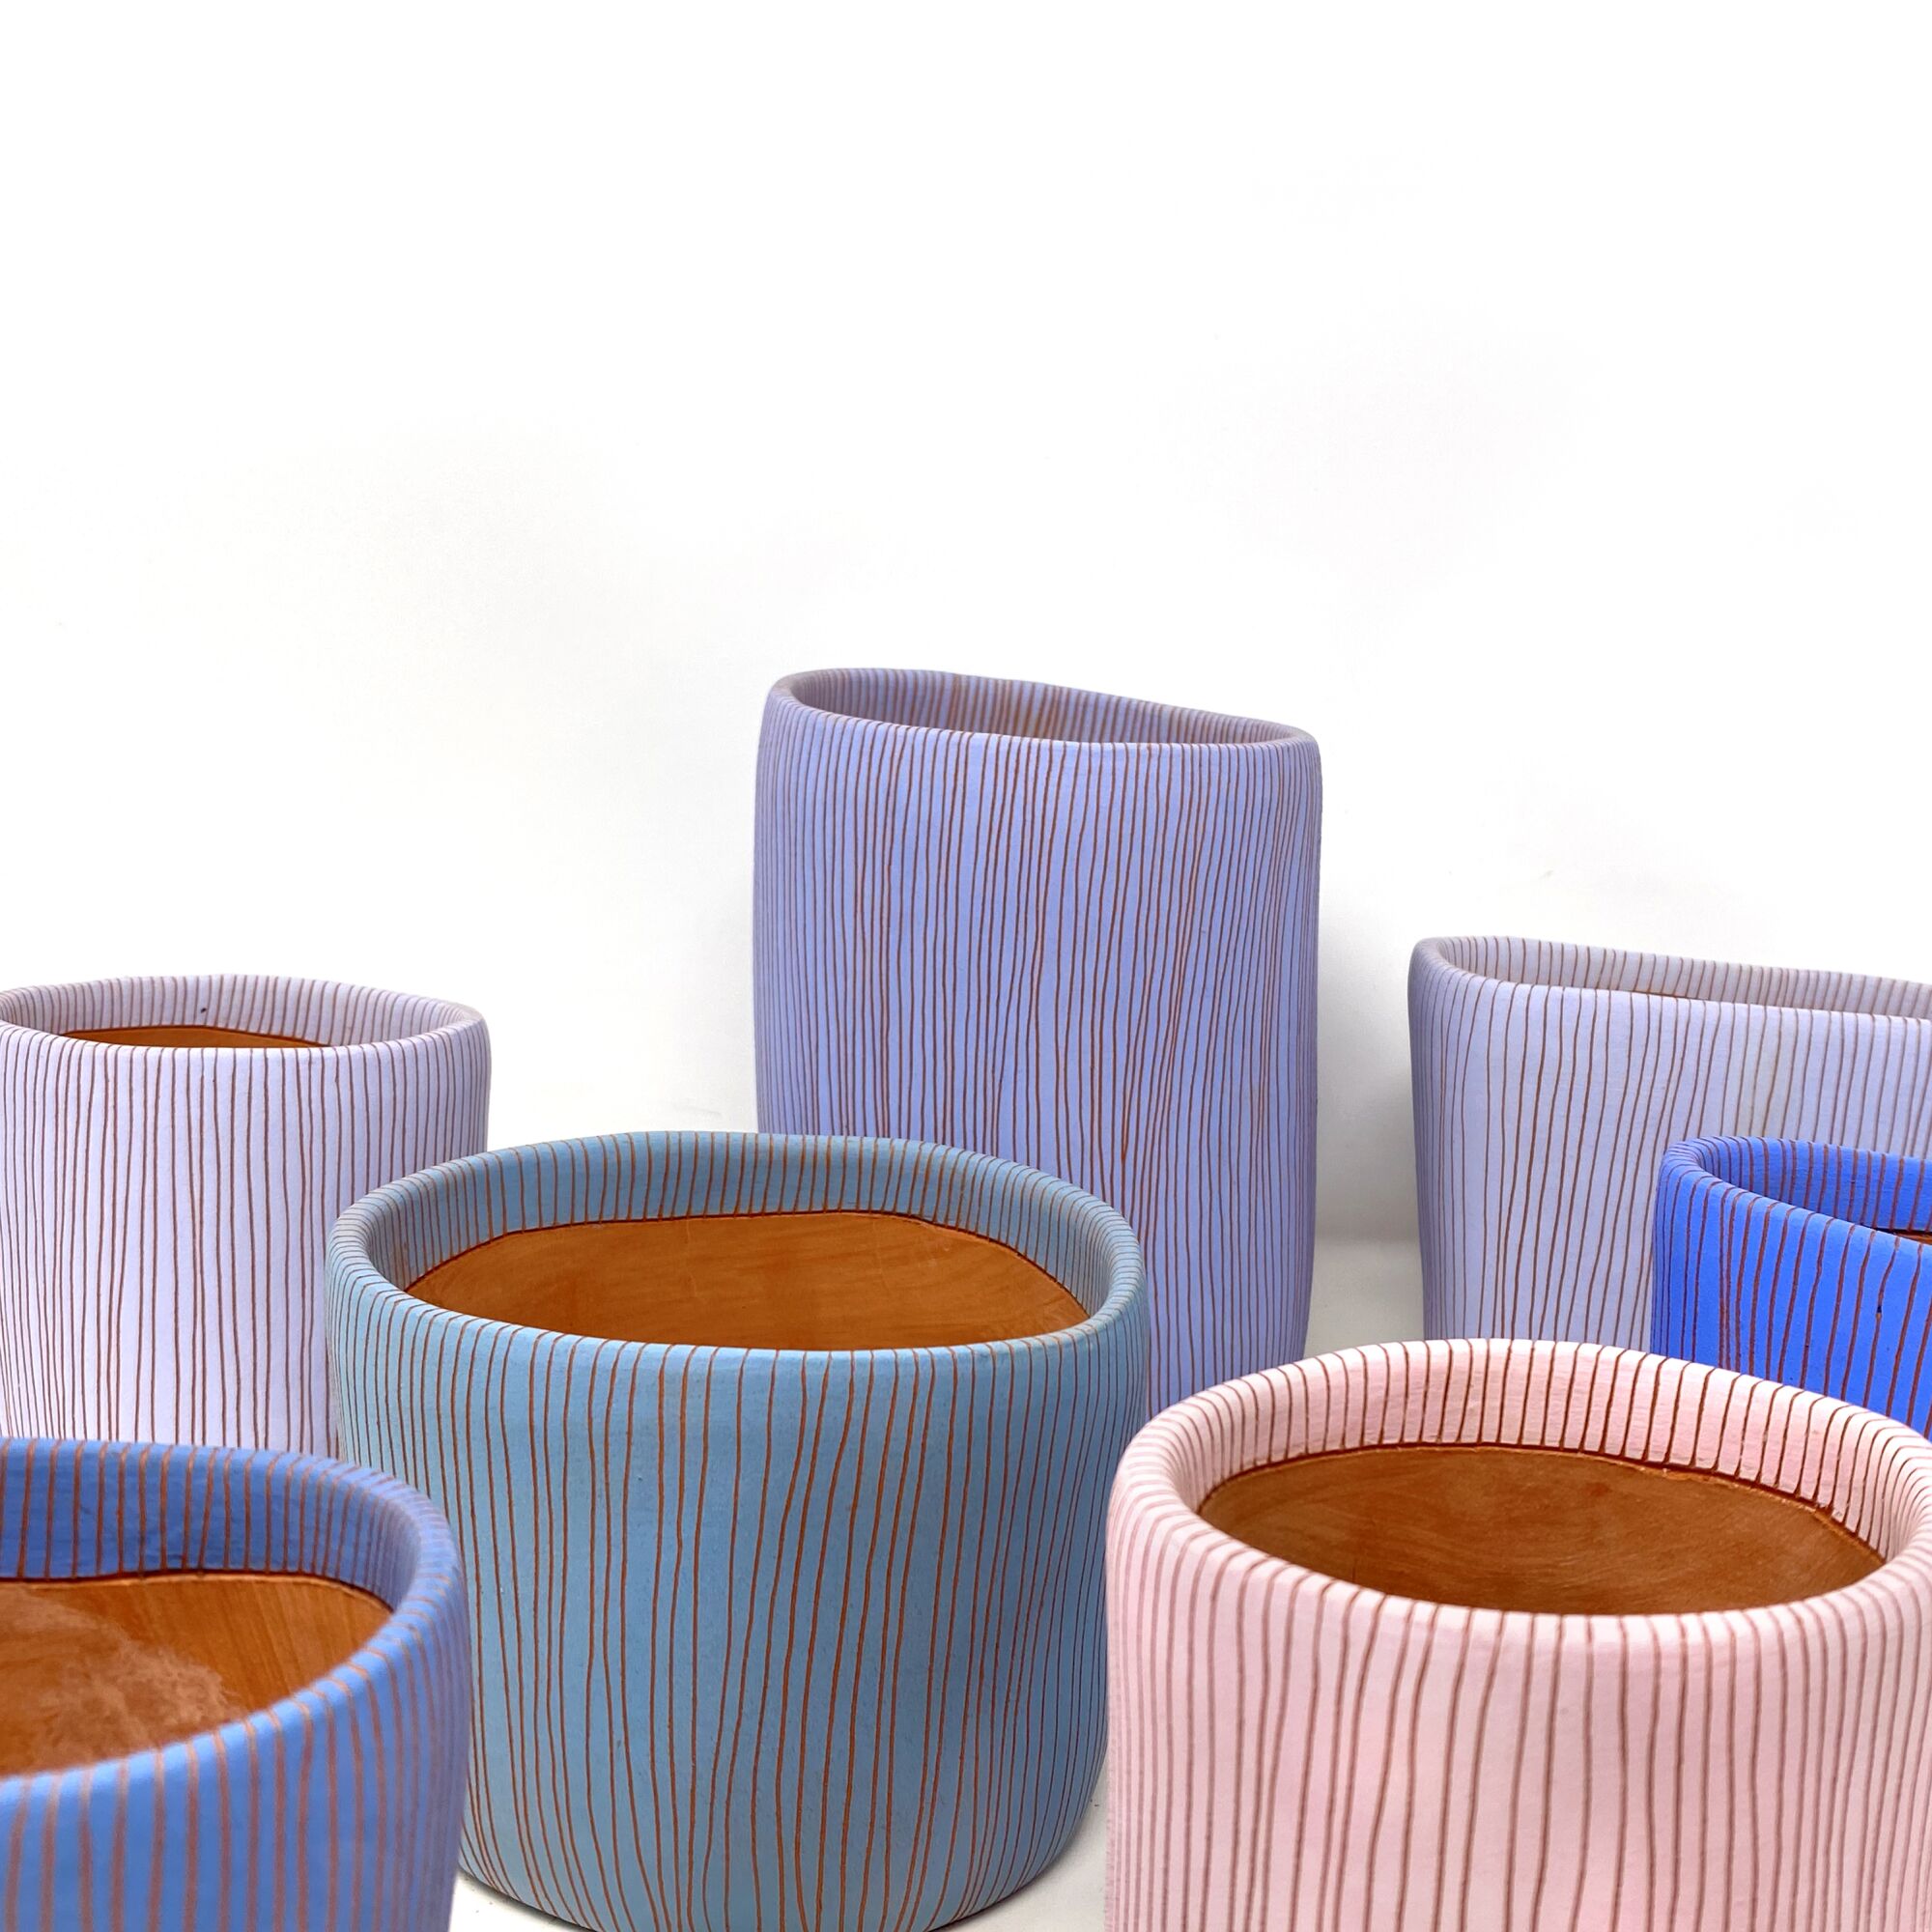 Three ceramic bowls carved with fine lines come in shadows of blue, turquoise and pink.